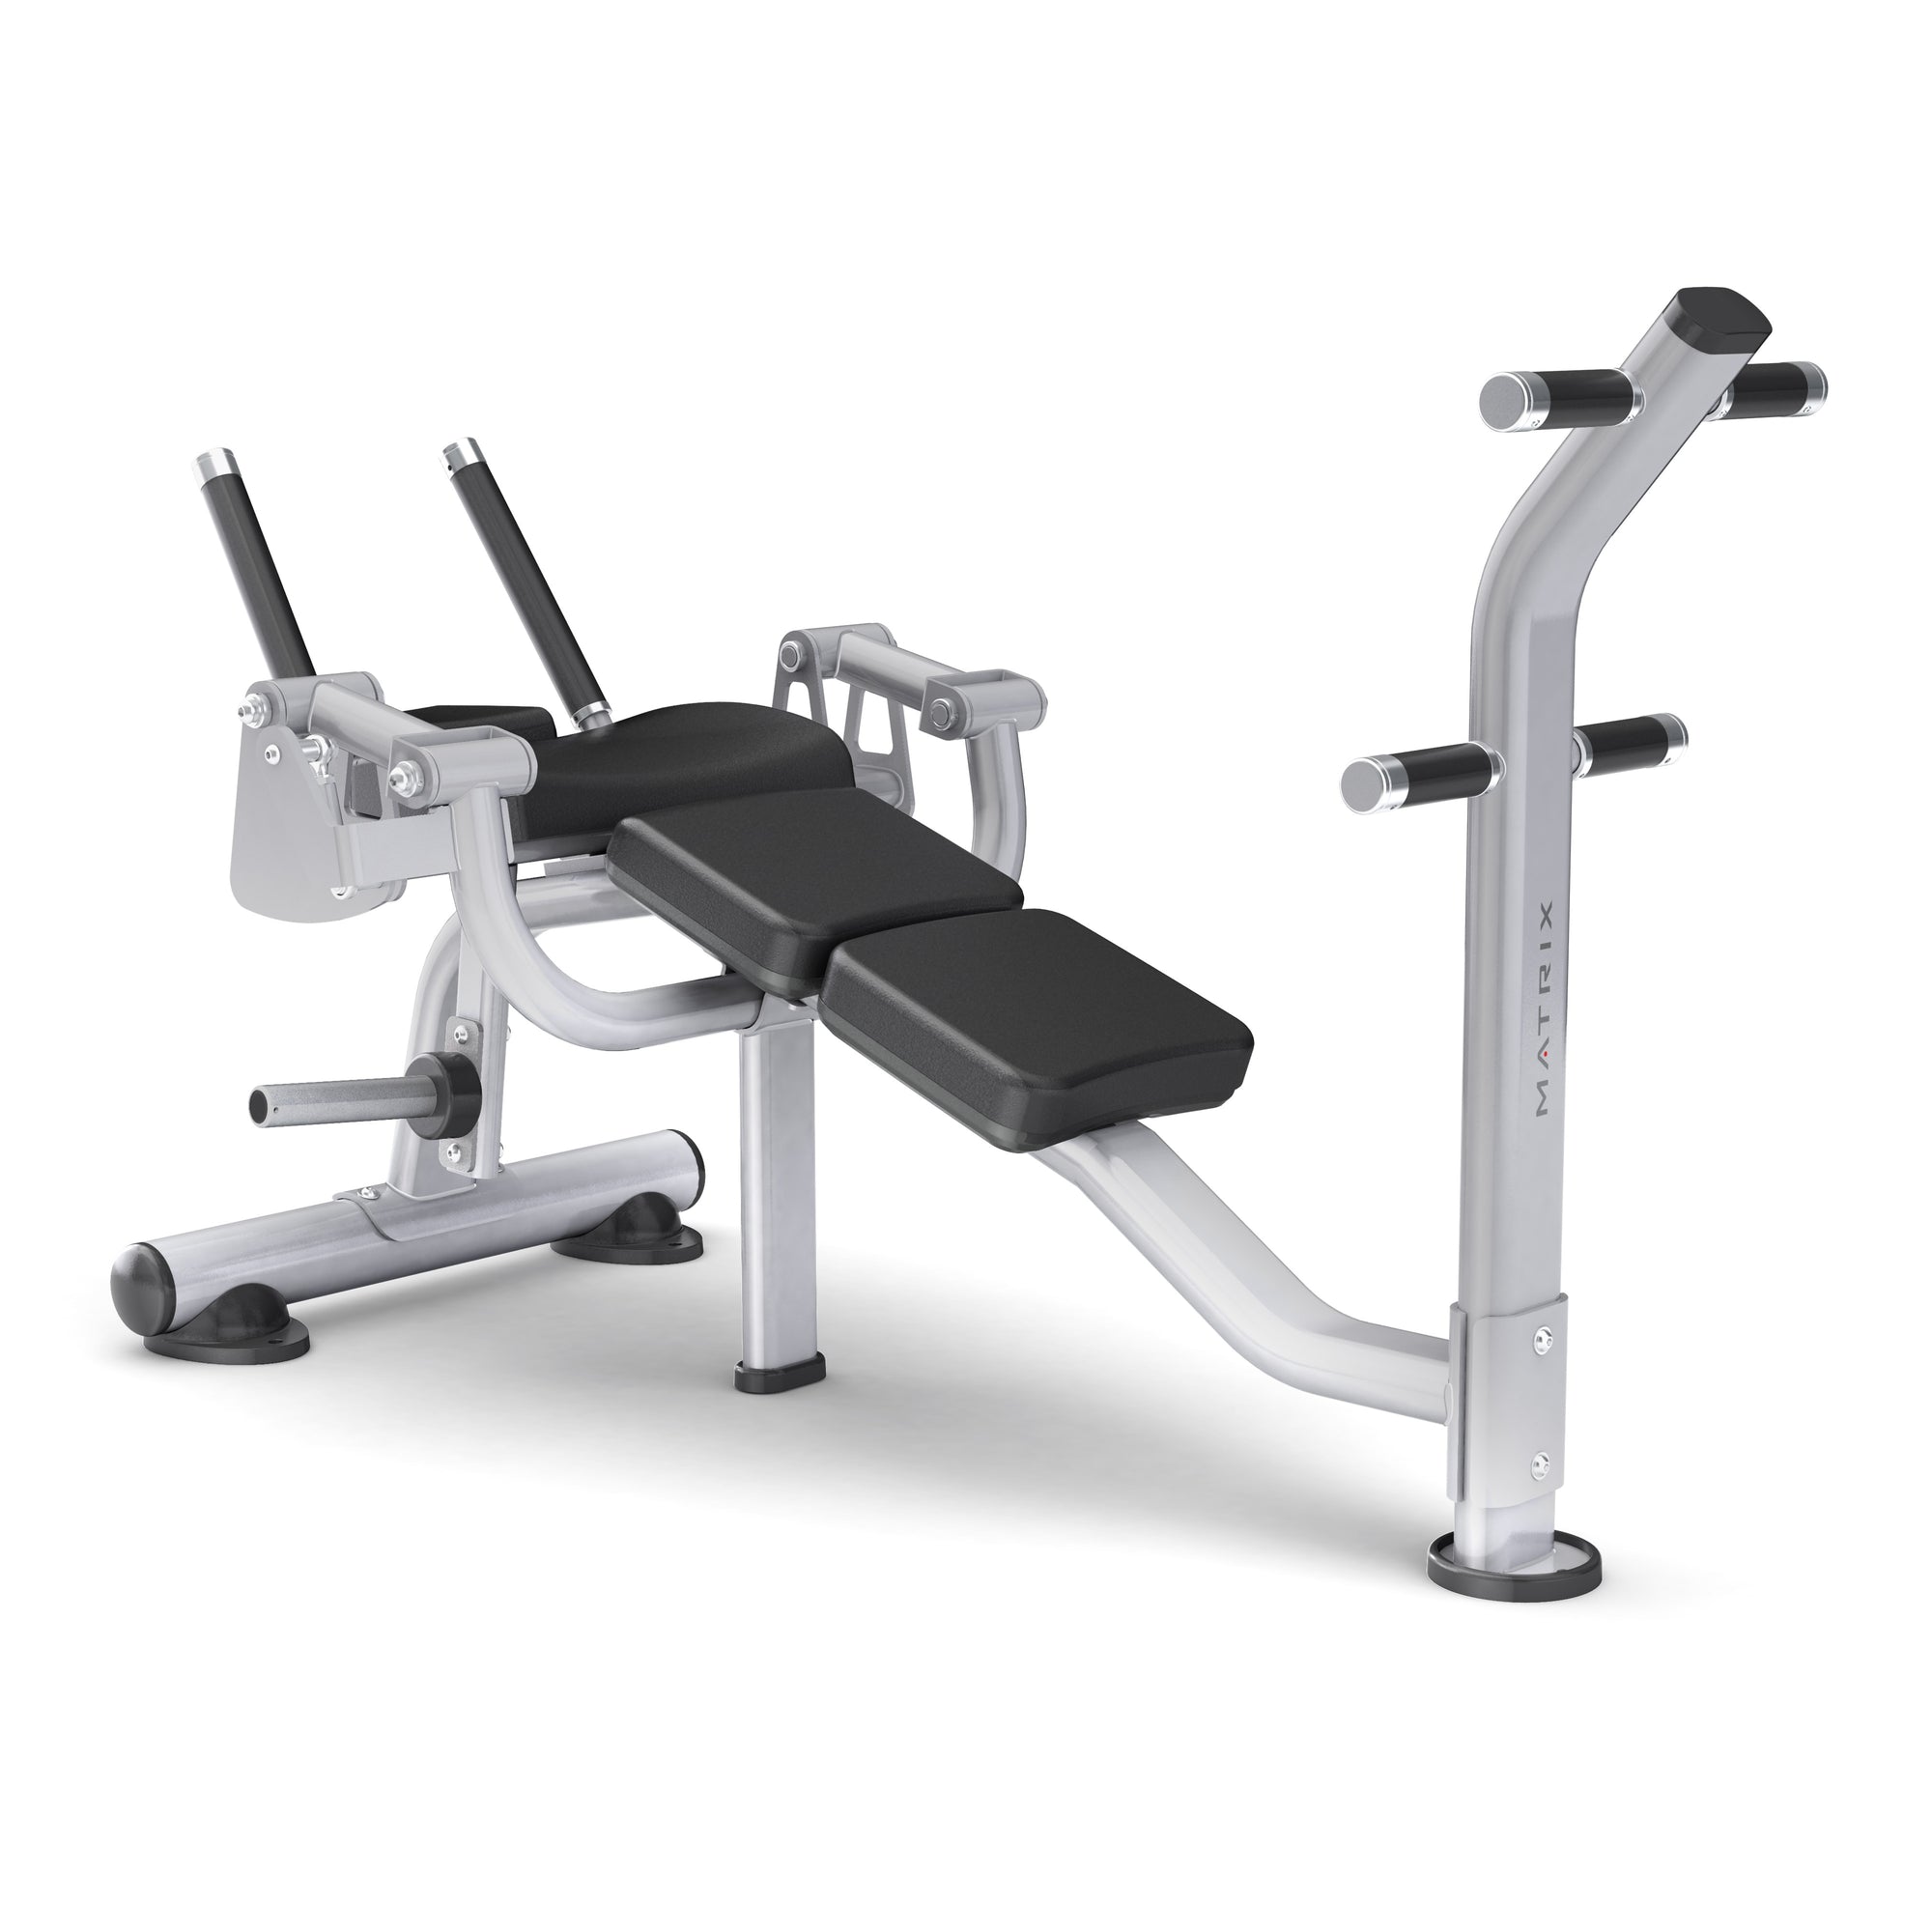 Matrix Fitness Magnum Ab Crunch Bench full view | Fitness Experience